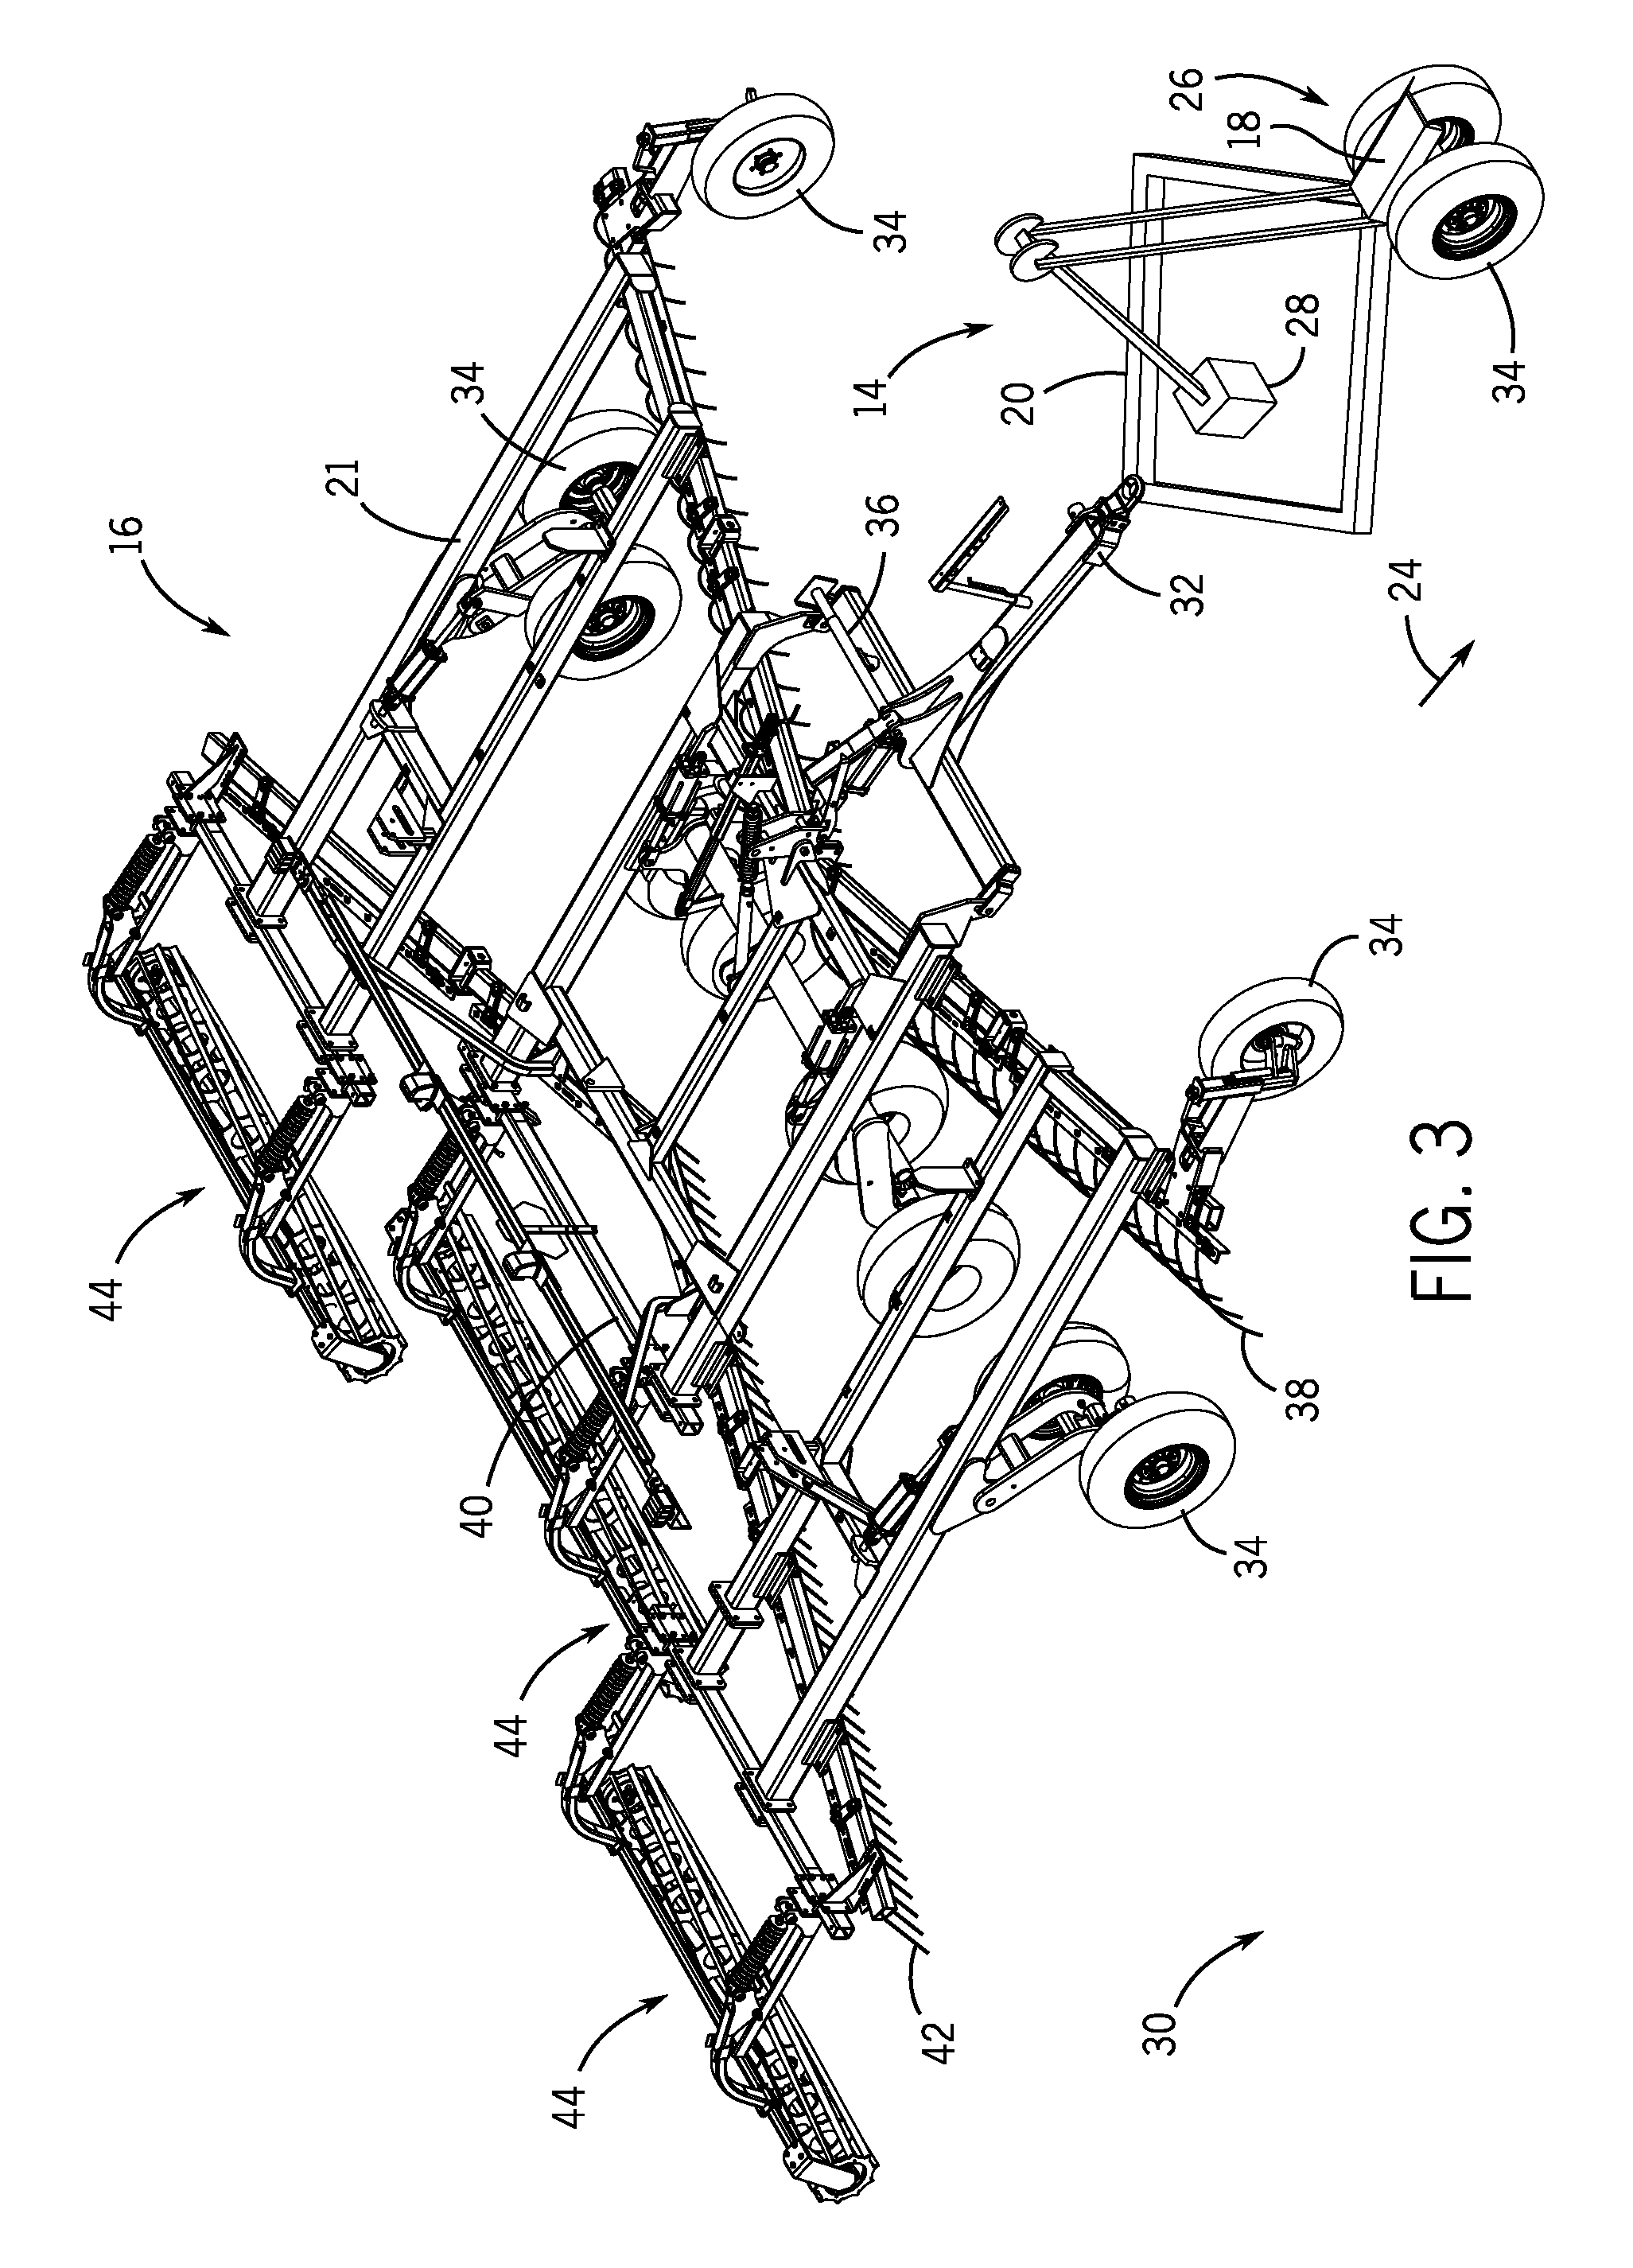 System and method for controlling an agricultural system based on soil analysis